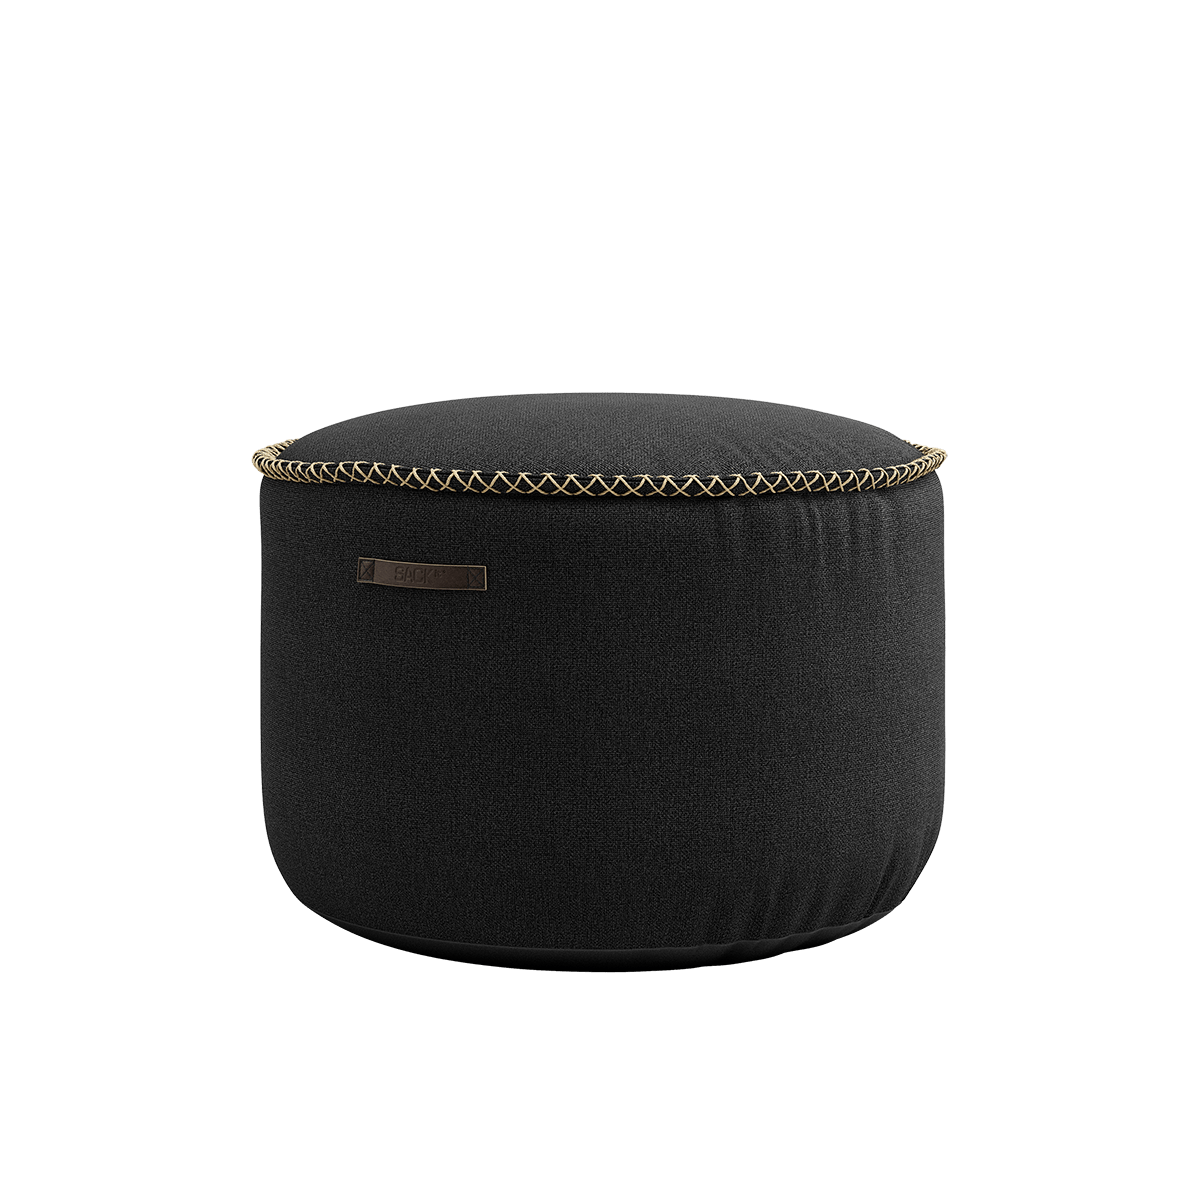 variant_8567011% | Medley Pouf [Contract] - Medley Black | SACKit